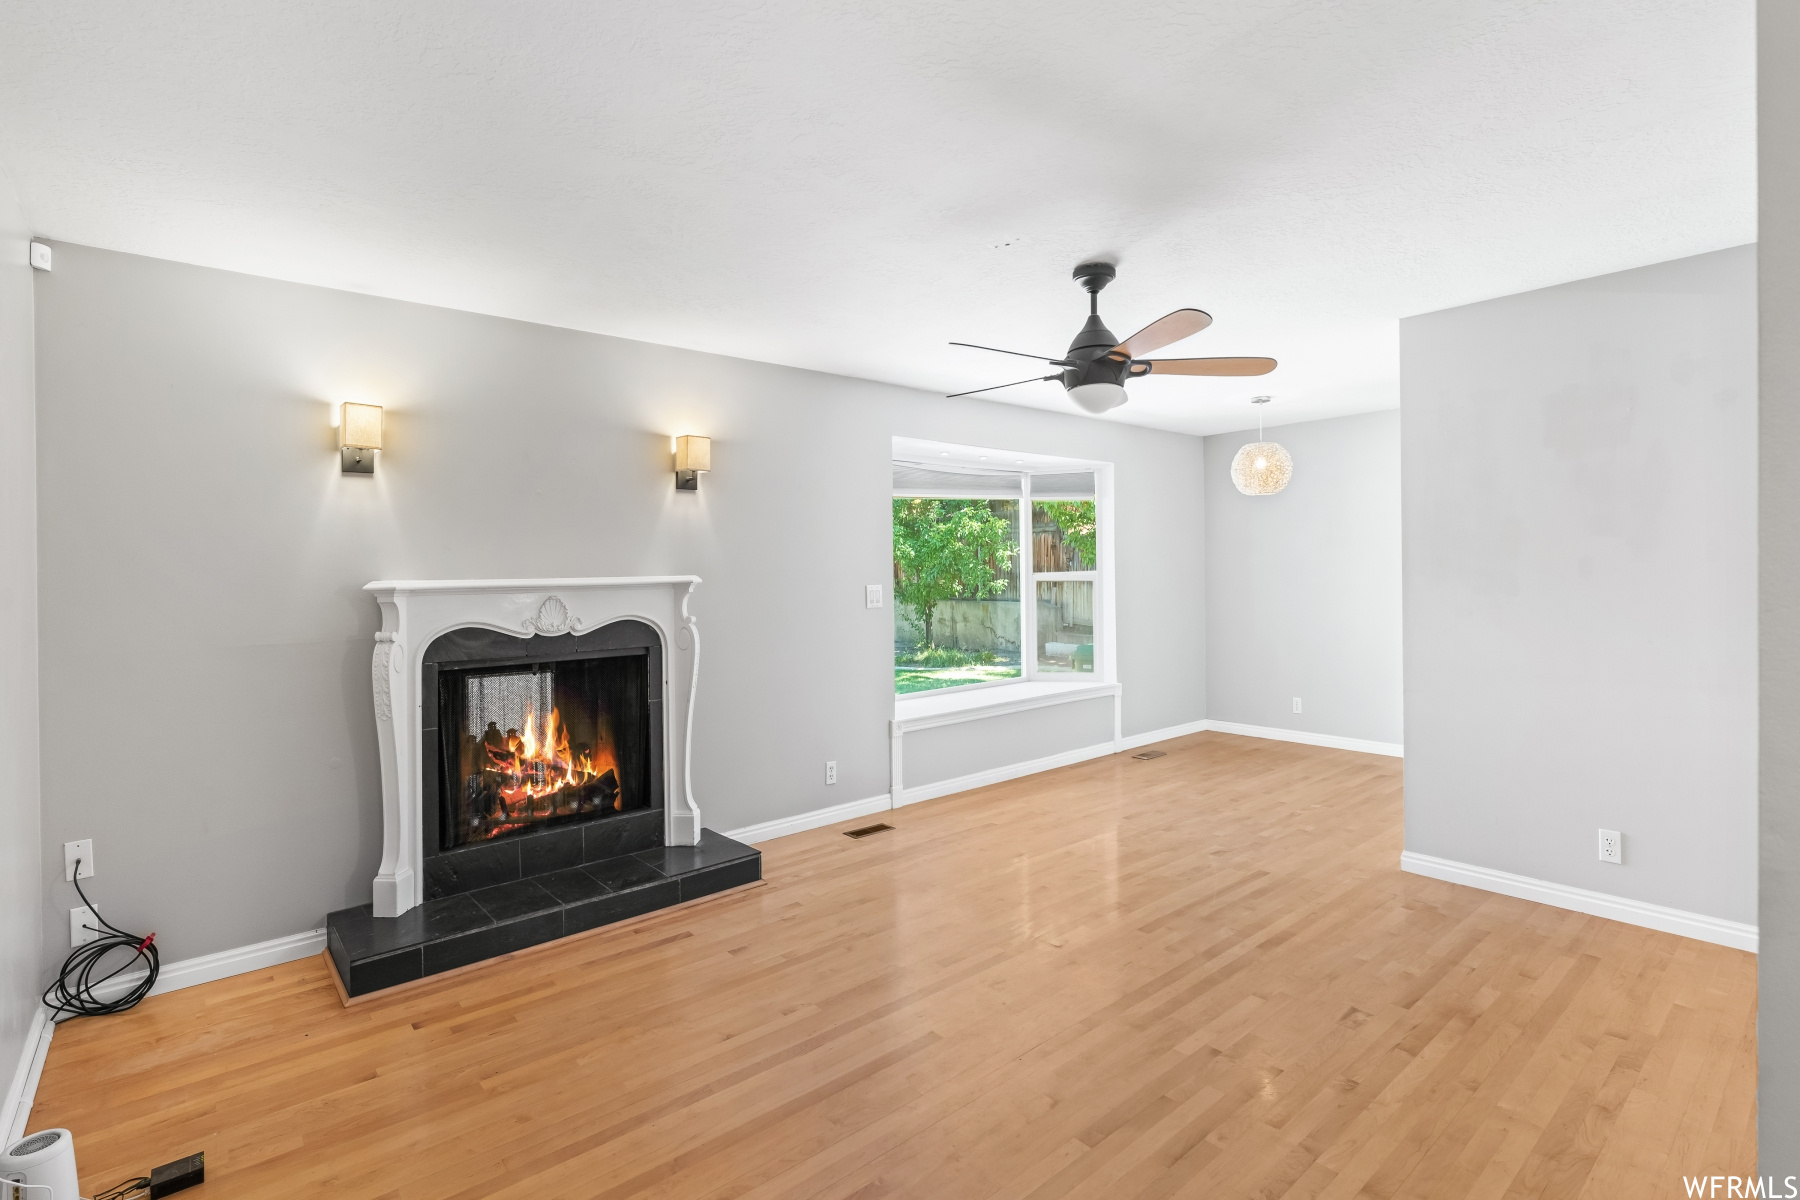 Living room featuring a fireplace, light hardwood floor, and ceiling fan